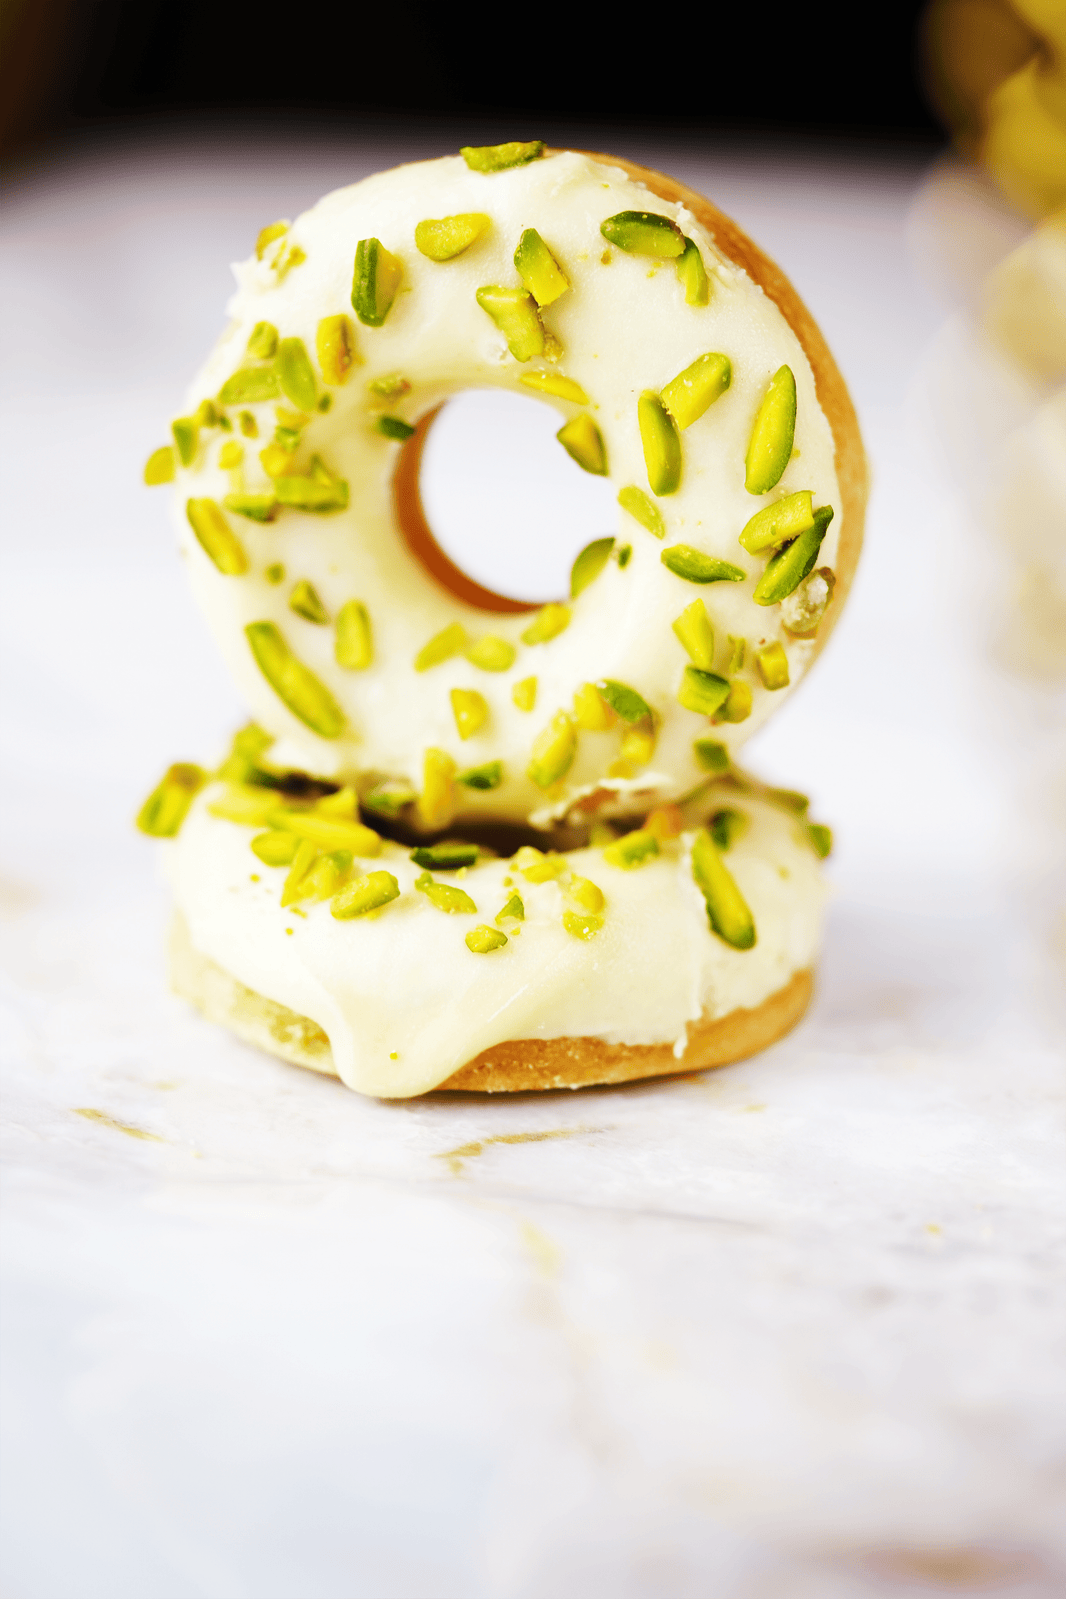 Pistachio Baked Donuts (Box of 2)